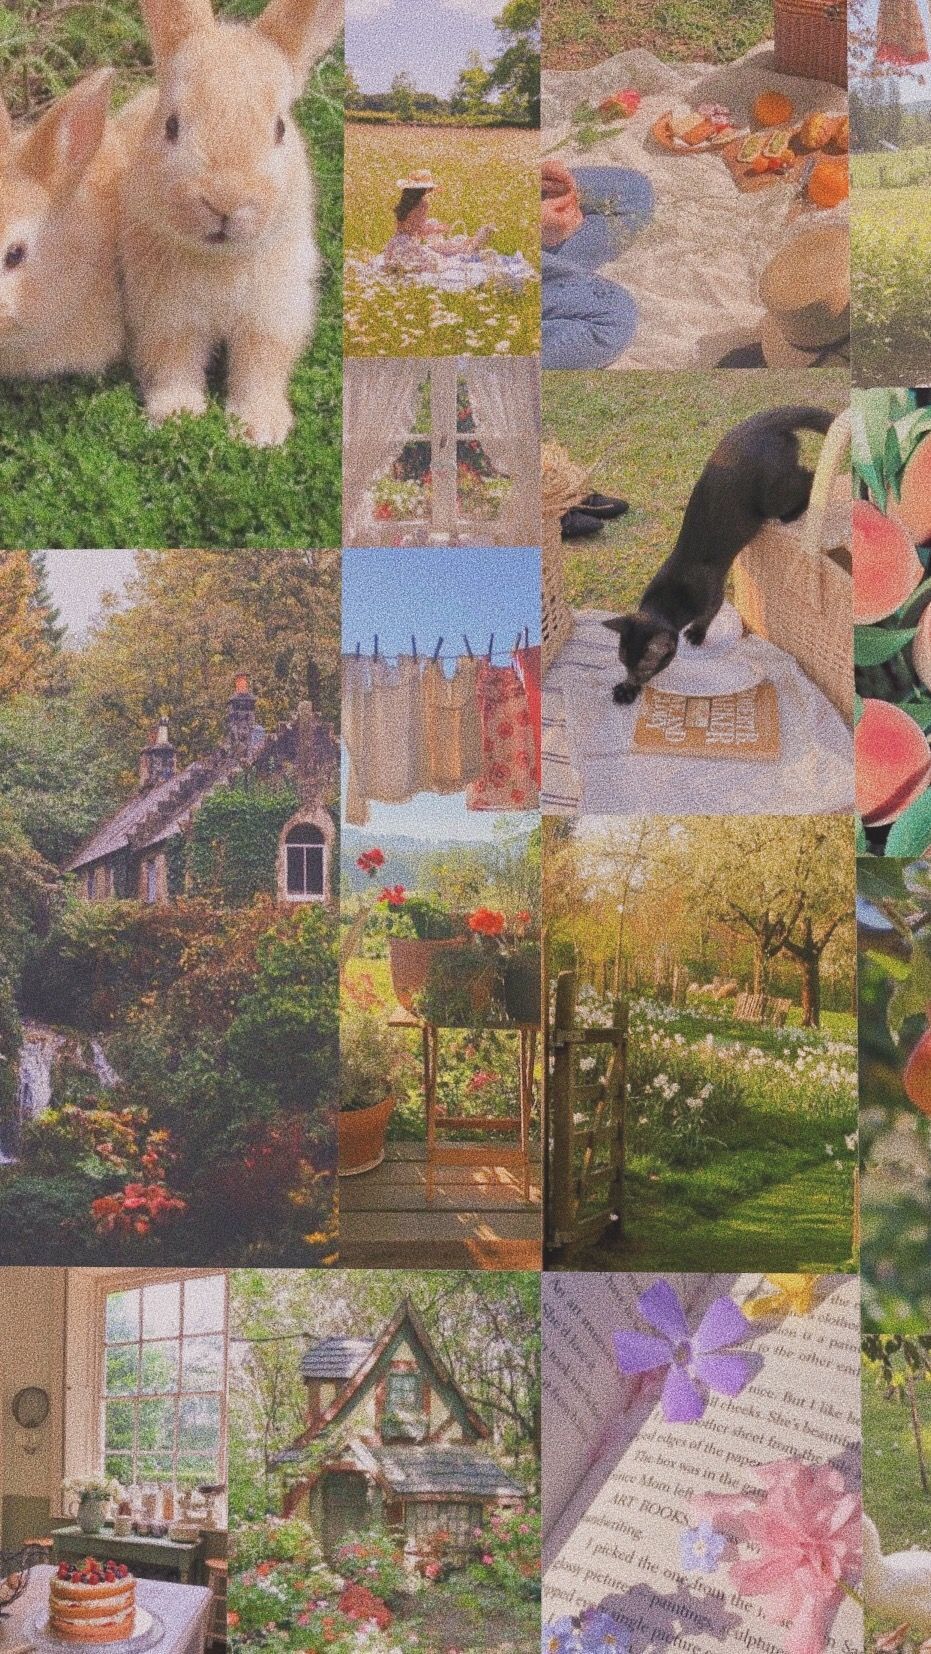 A collage of pictures of cats, rabbits, flowers, and a garden. - Cottagecore